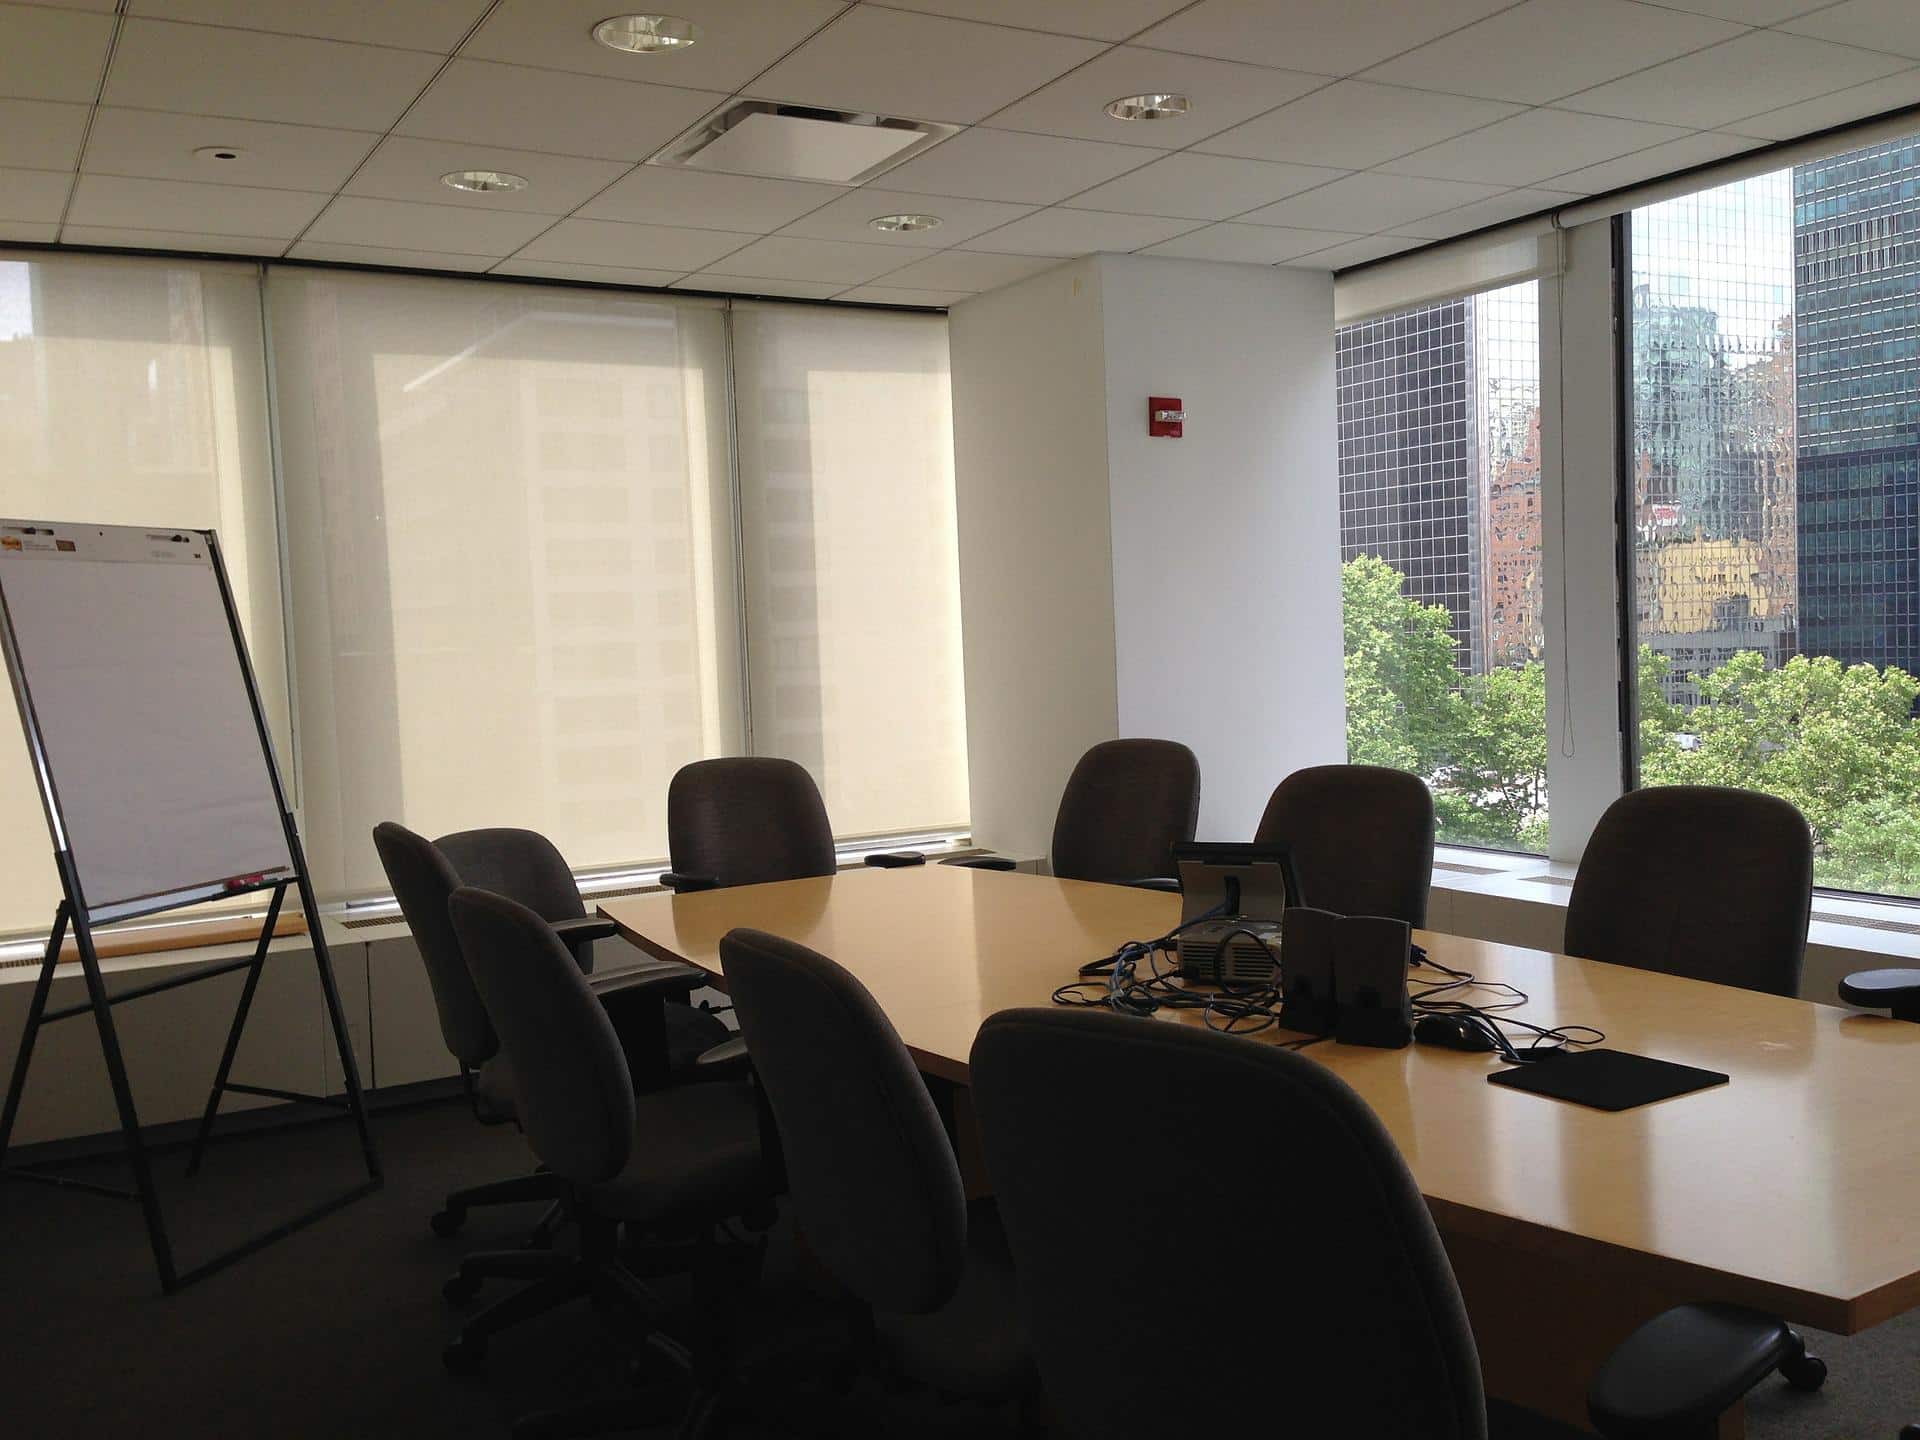 conference-room-g42a238134_1920